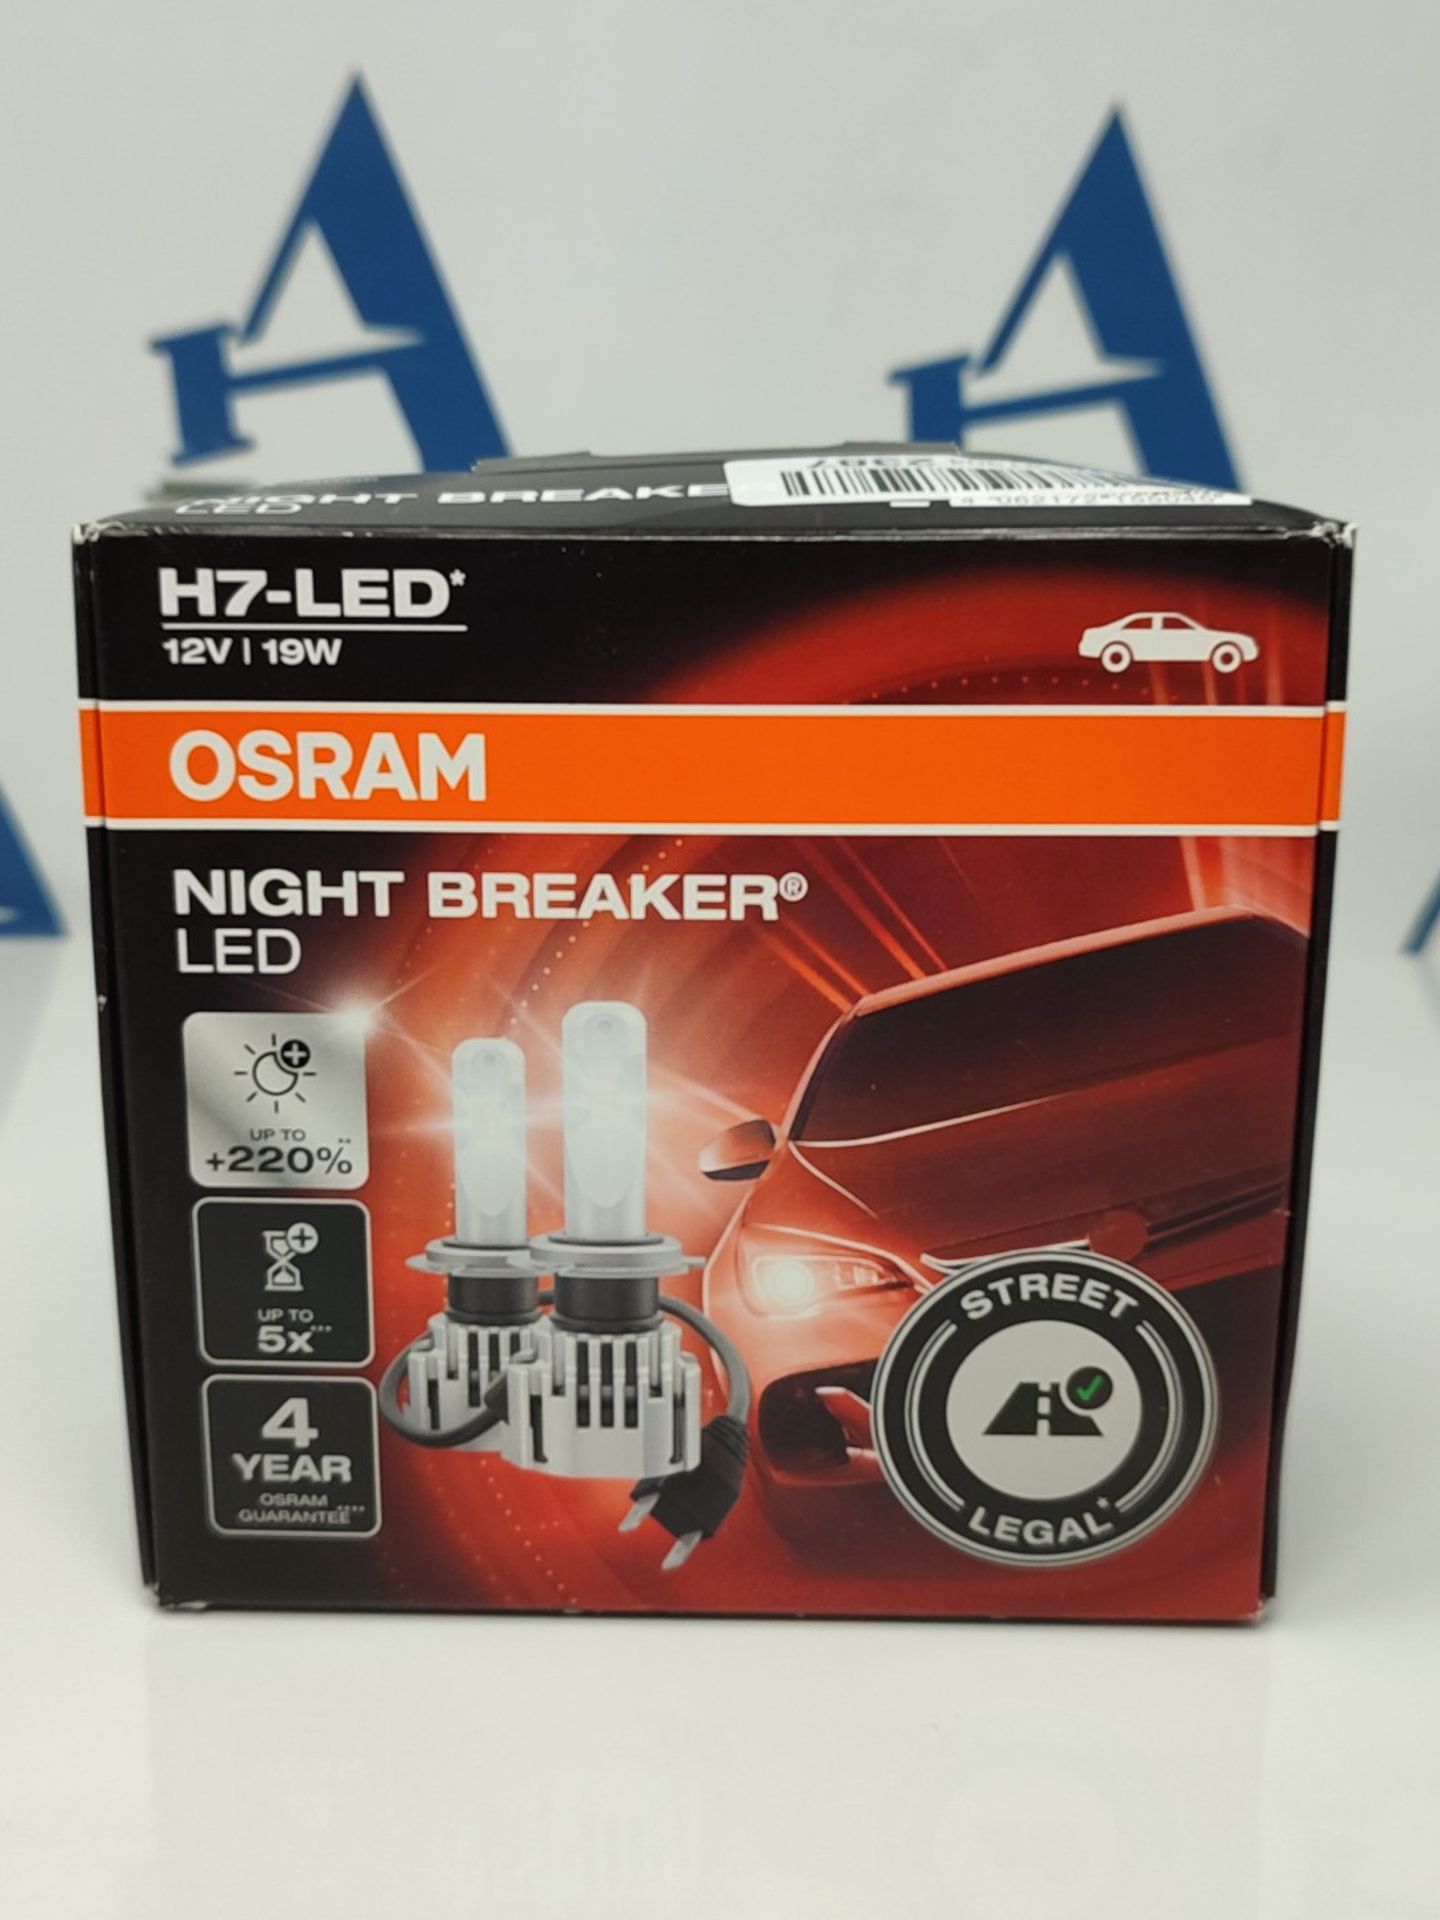 RRP £96.00 OSRAM NIGHT BREAKER H7-LED; up to 220% more brightness, first legal LED H7 low beam wi - Image 2 of 3